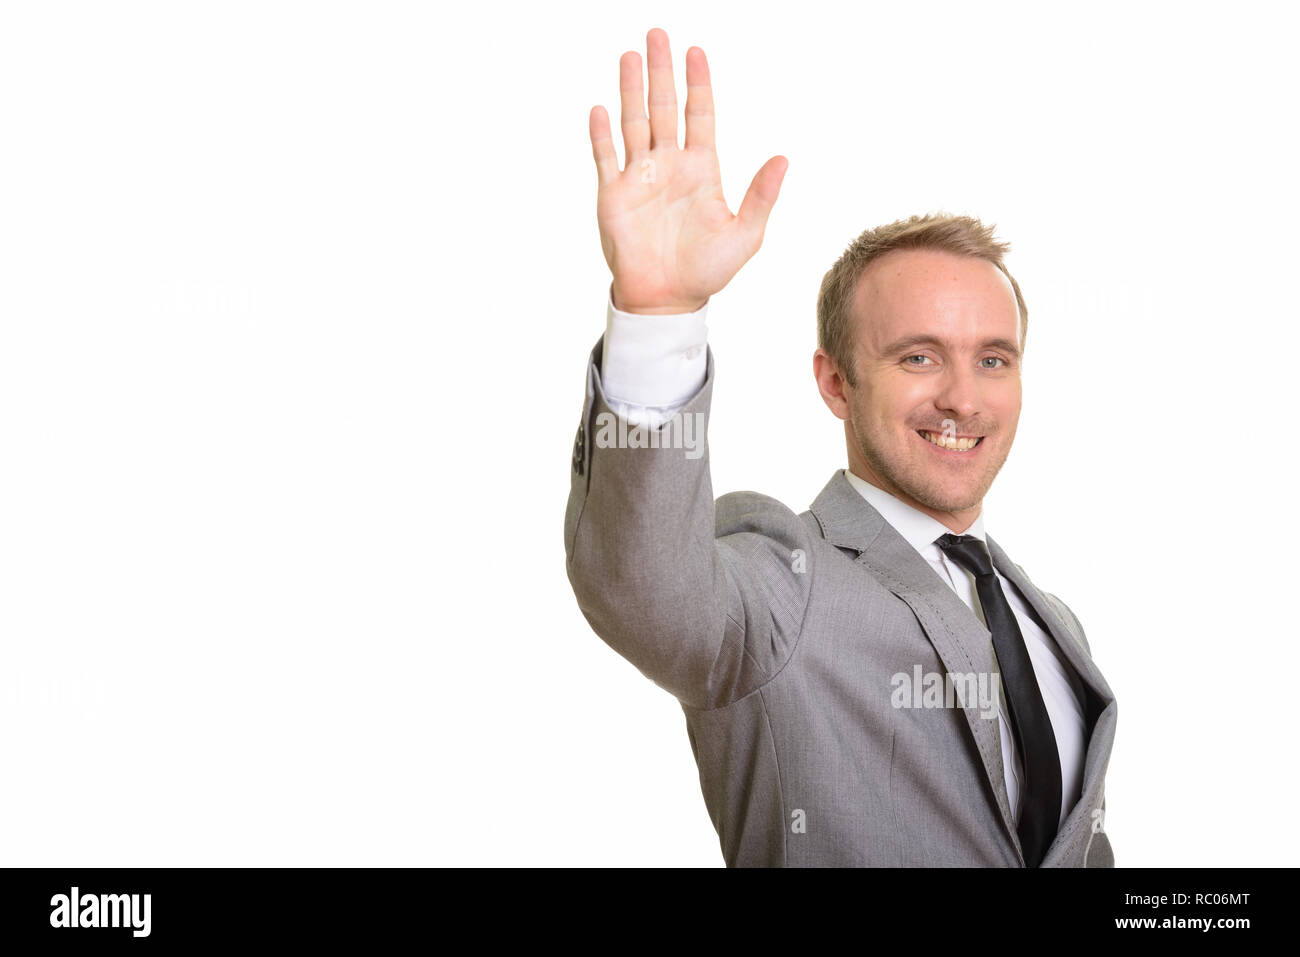 Happy handsome Asian businessman raising hand isolated against white background Banque D'Images